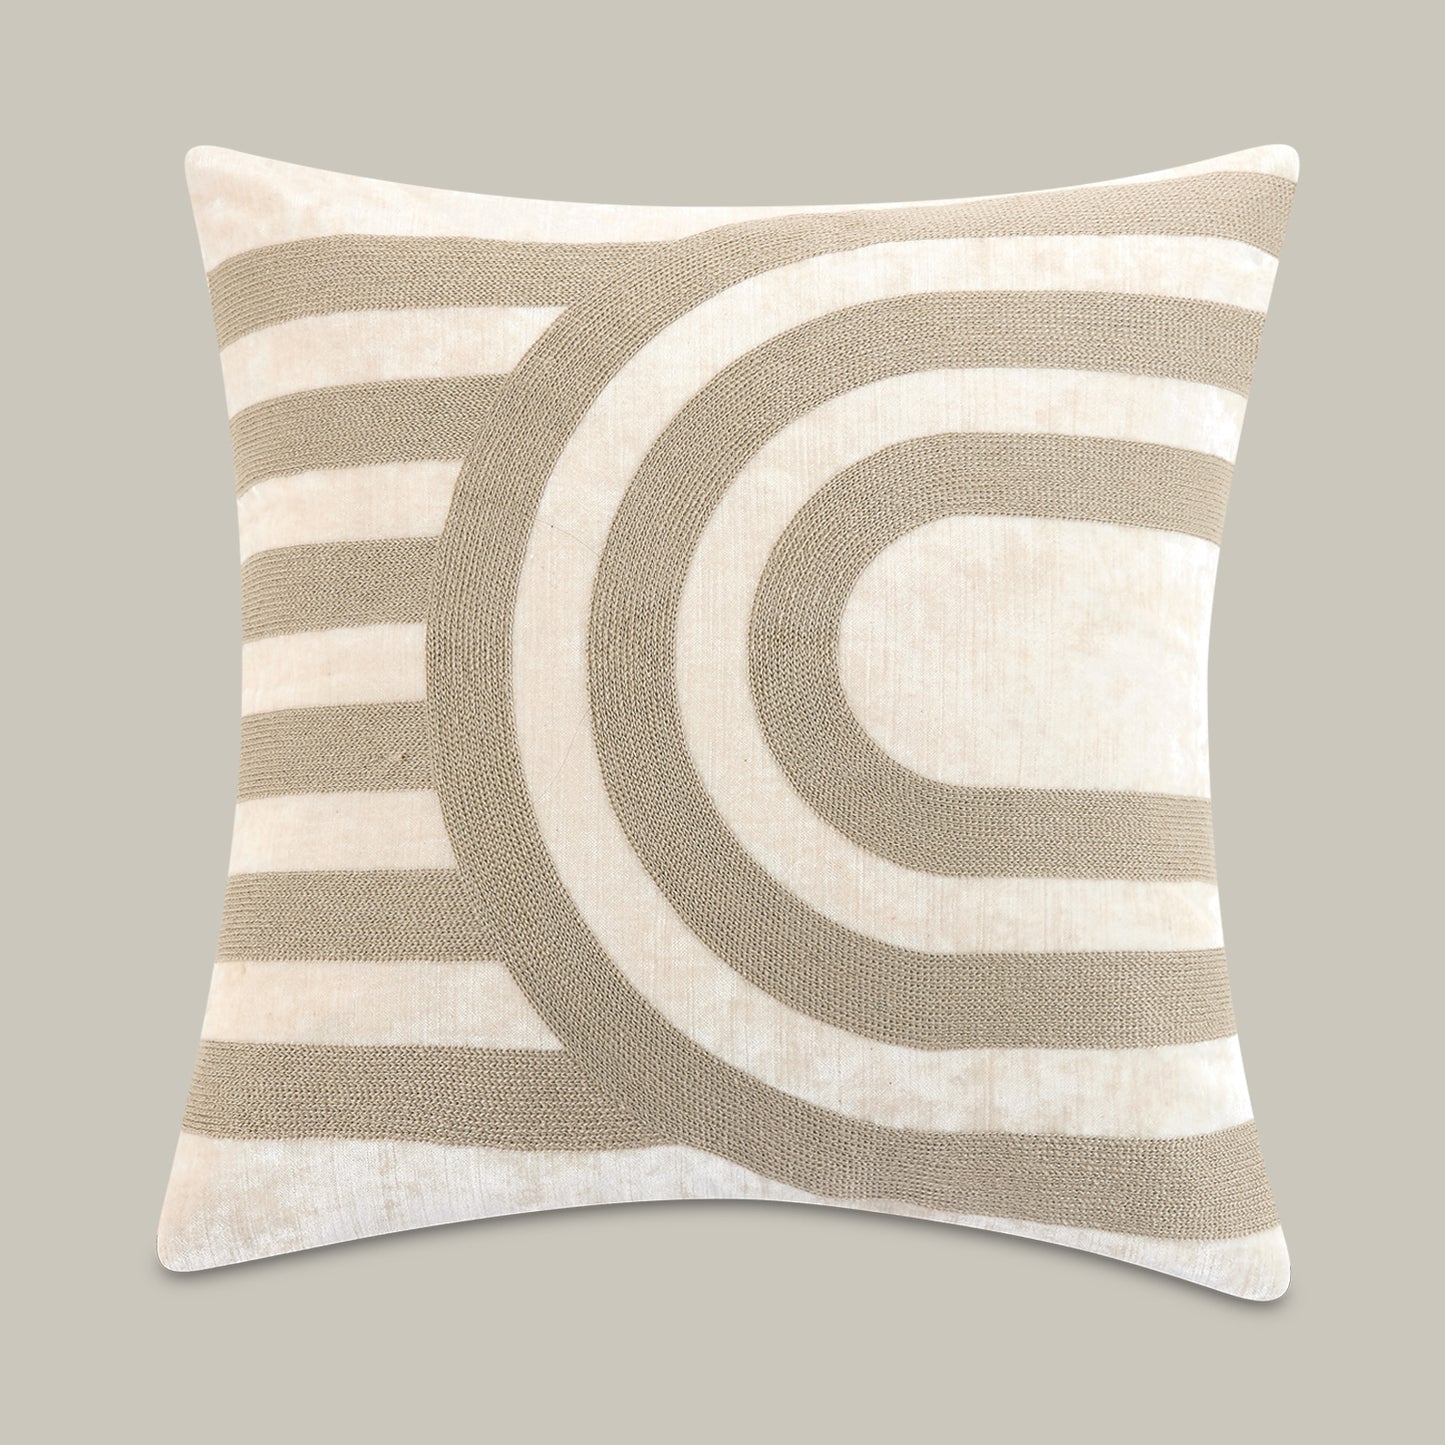 Vence Crewel Embroidered Square Pillow